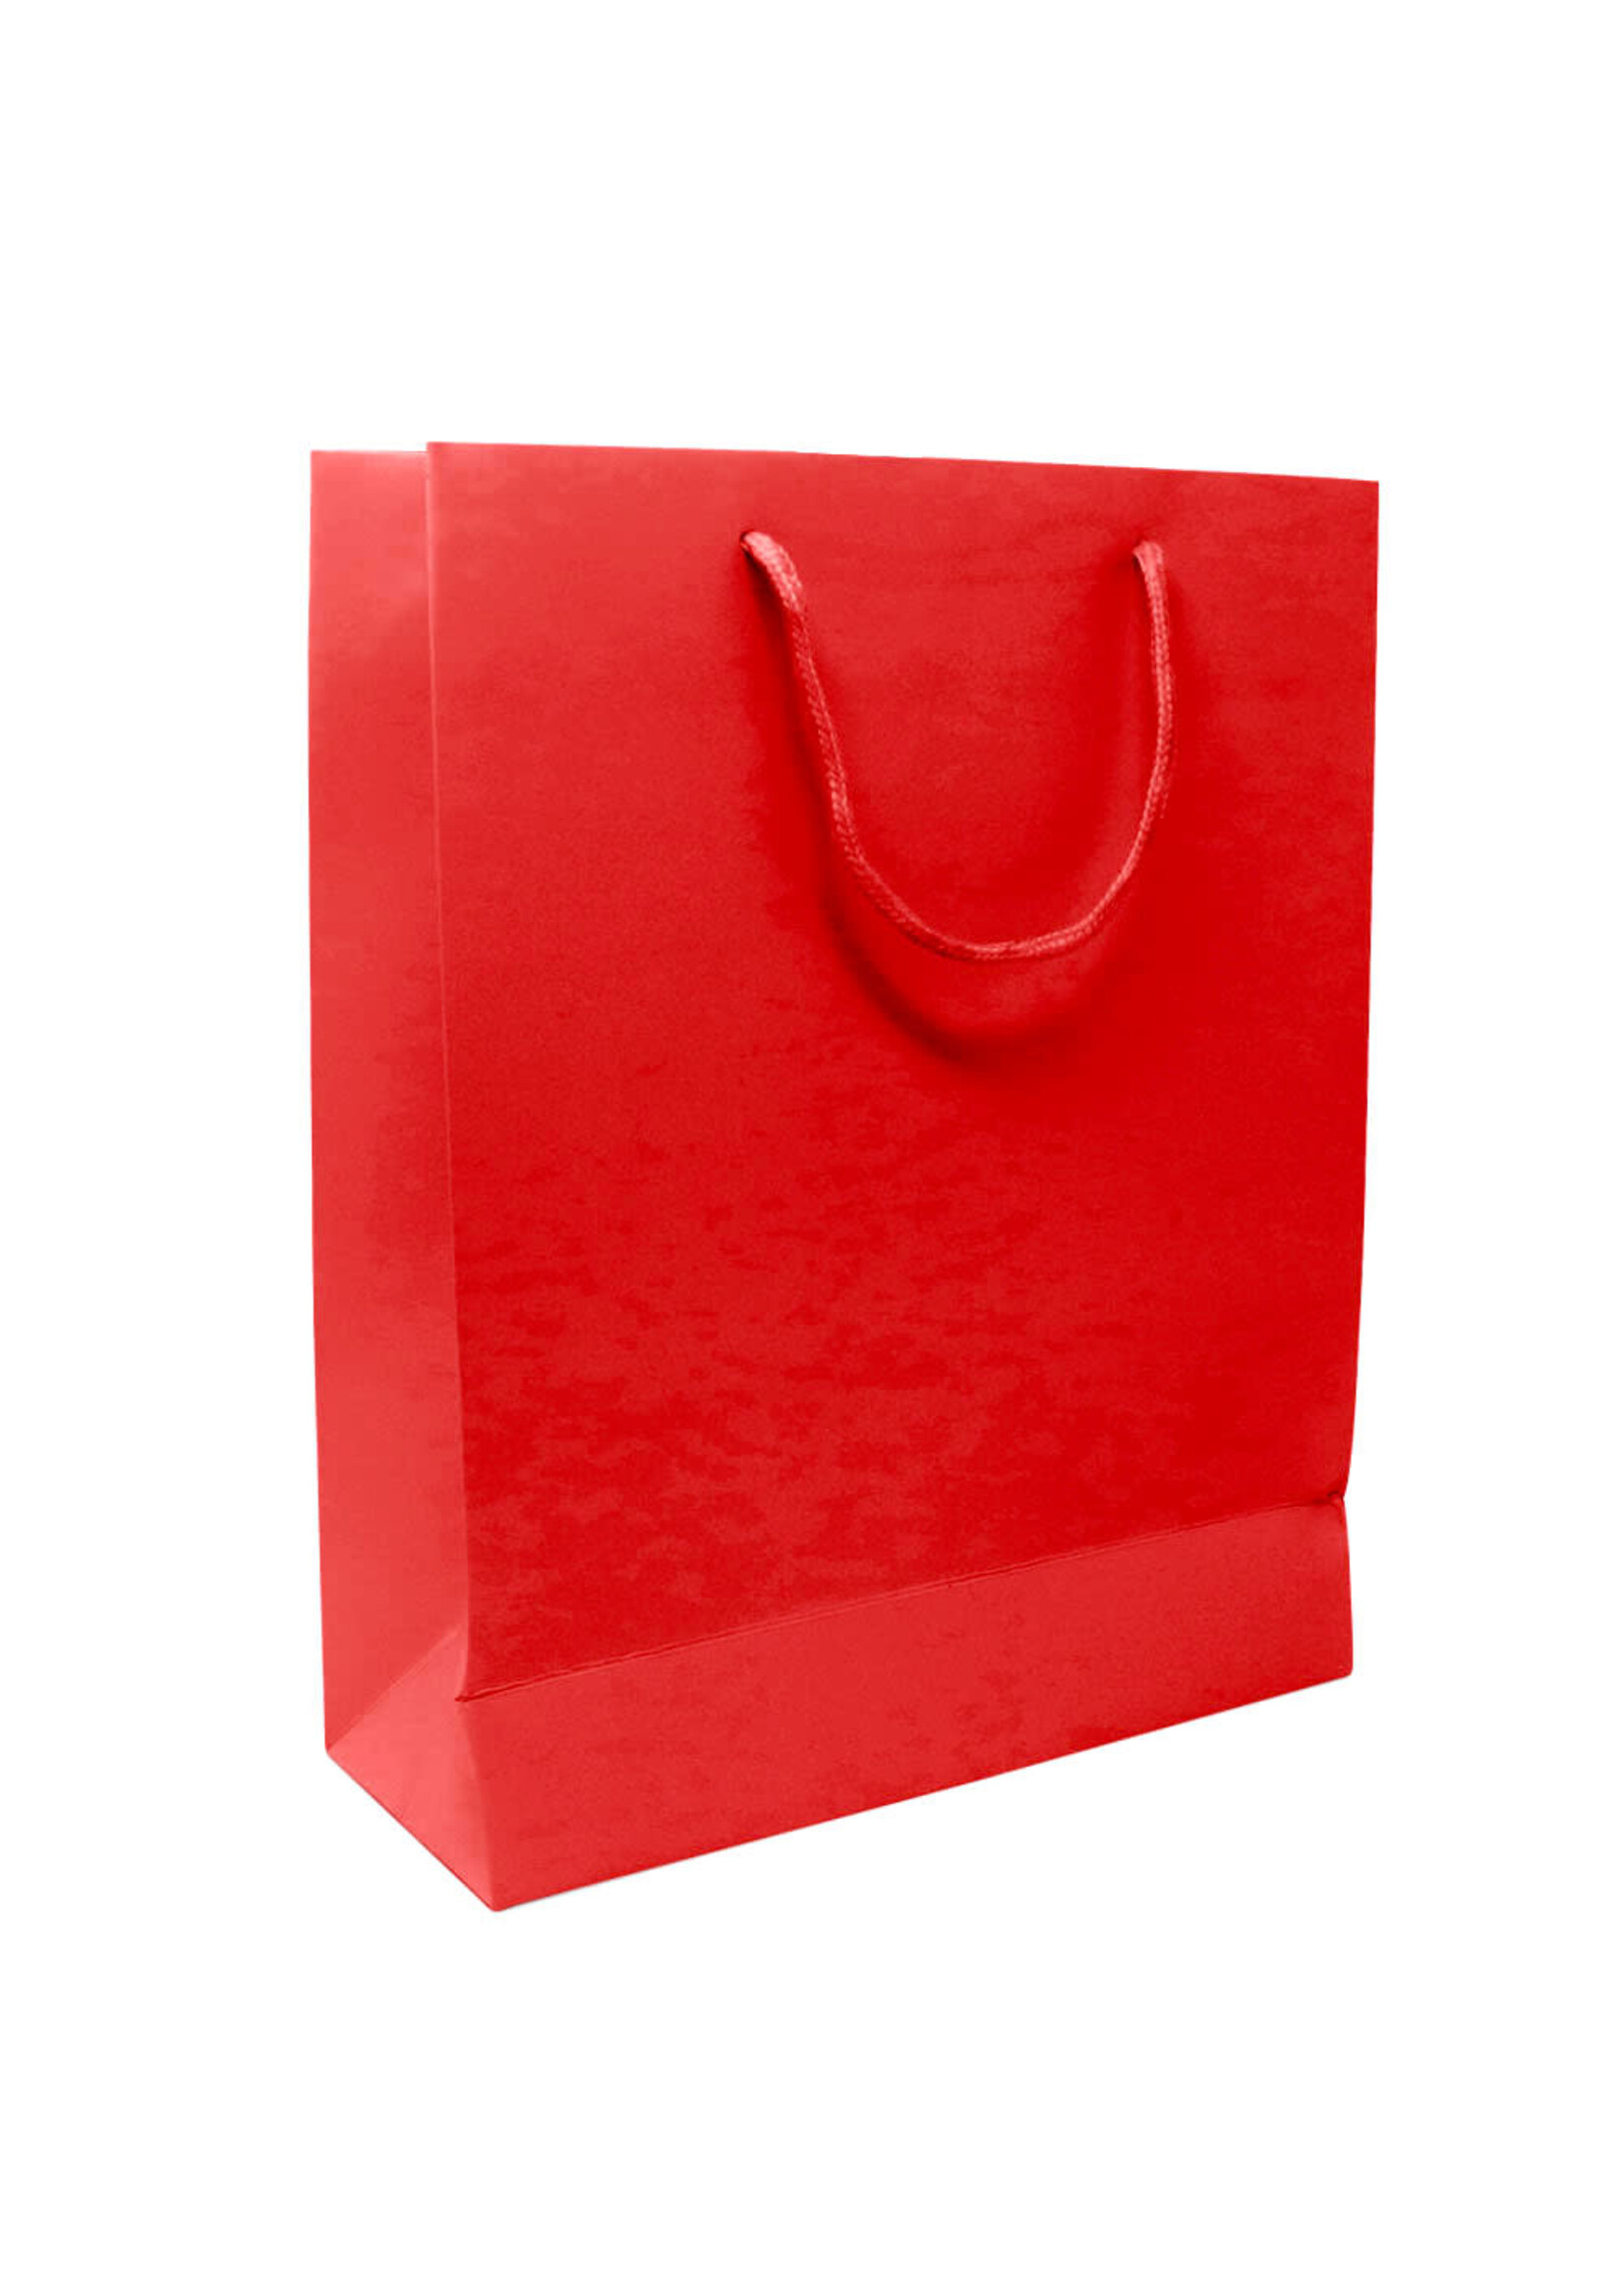 SOLID RED GIFT BAGS LARGE 12" X 16.5" X 4.75"